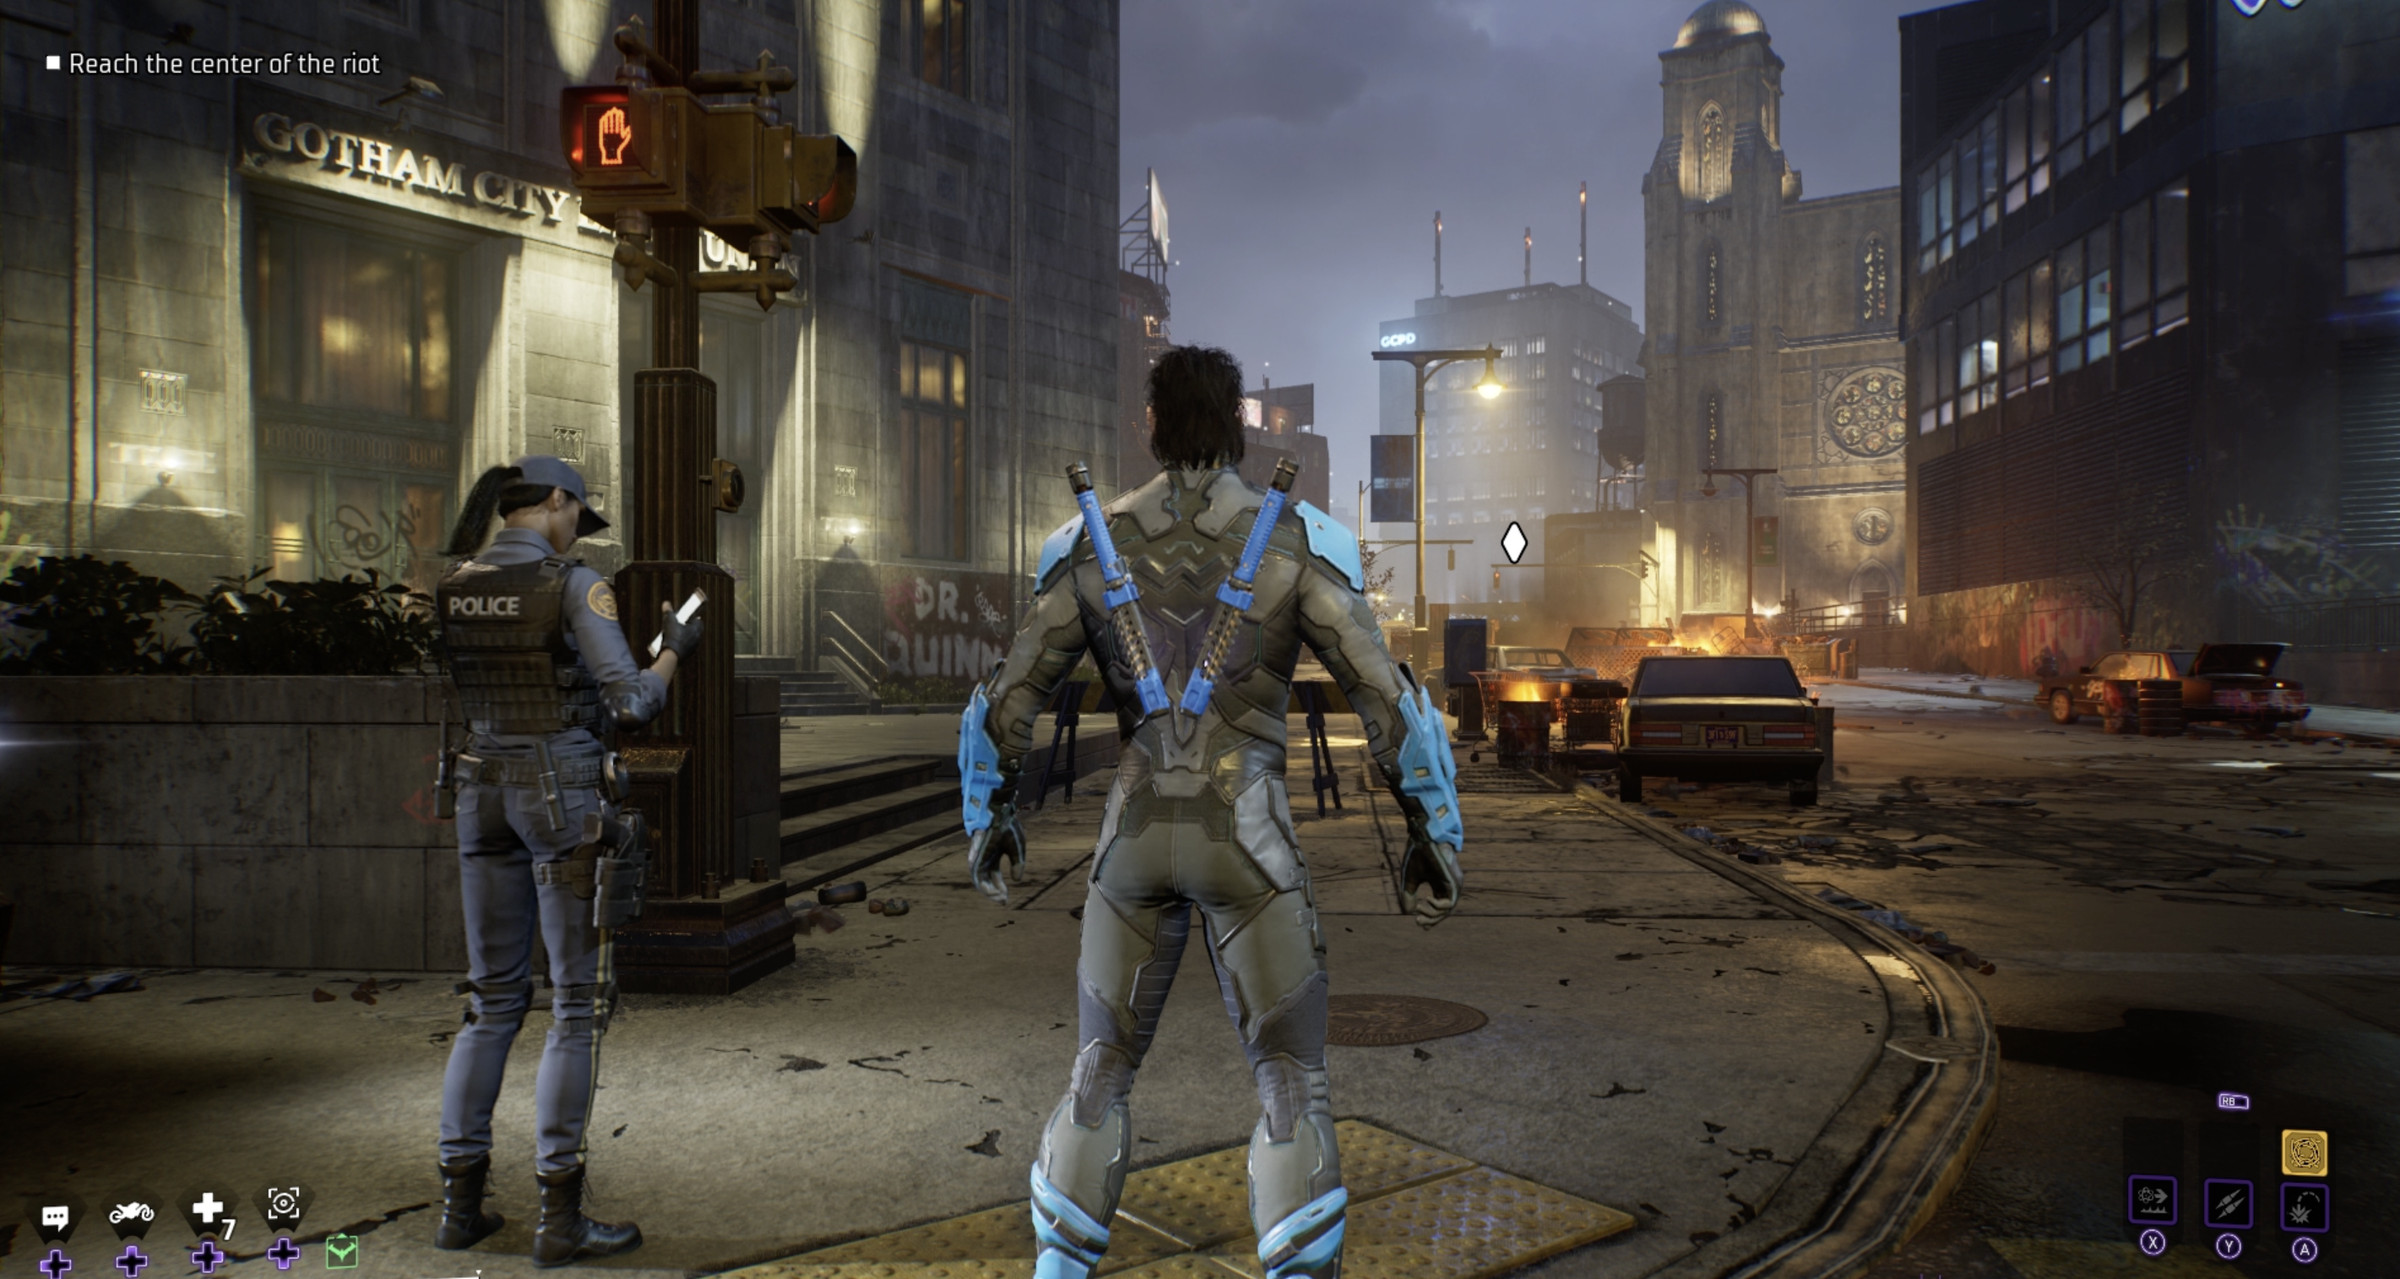 Screenshot from Gotham Knights featuring Nightwing wearing black and blue tactical armor standing next to Gotham Police officer Rene Montoya